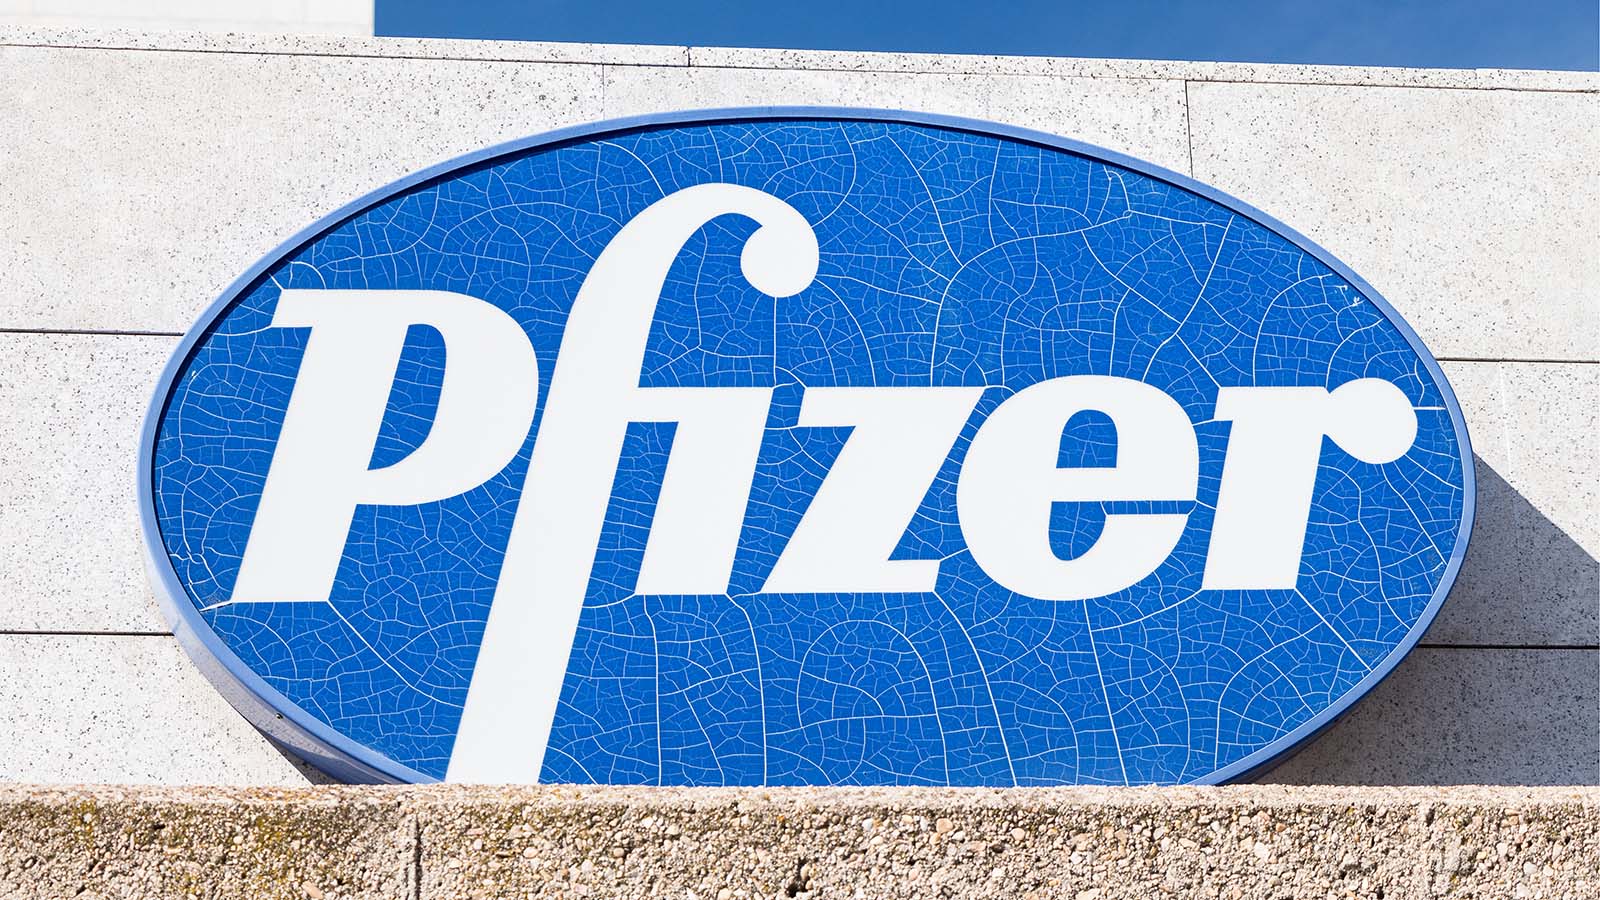 PFE Stock. Pfizer logo on Pfizer building. Pfizer is an American pharmaceutical corporation.